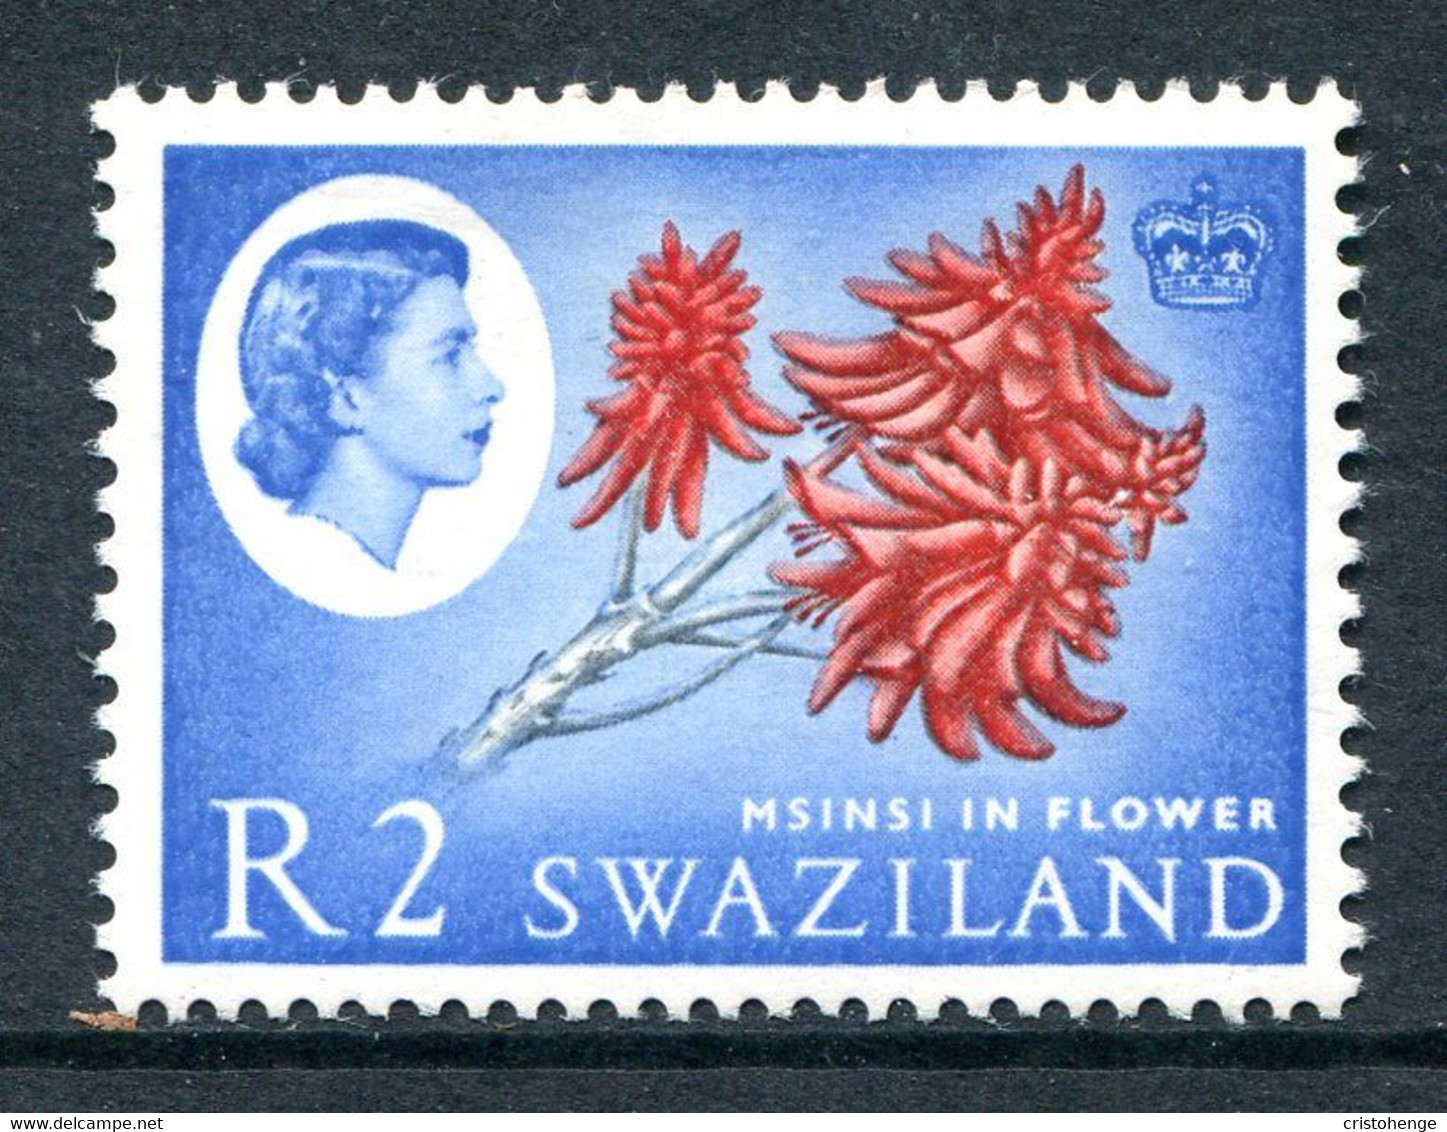 Swaziland 1962-66 Pictorials - 2r Msinsi In Flower HM (SG 105) - Swasiland (...-1967)